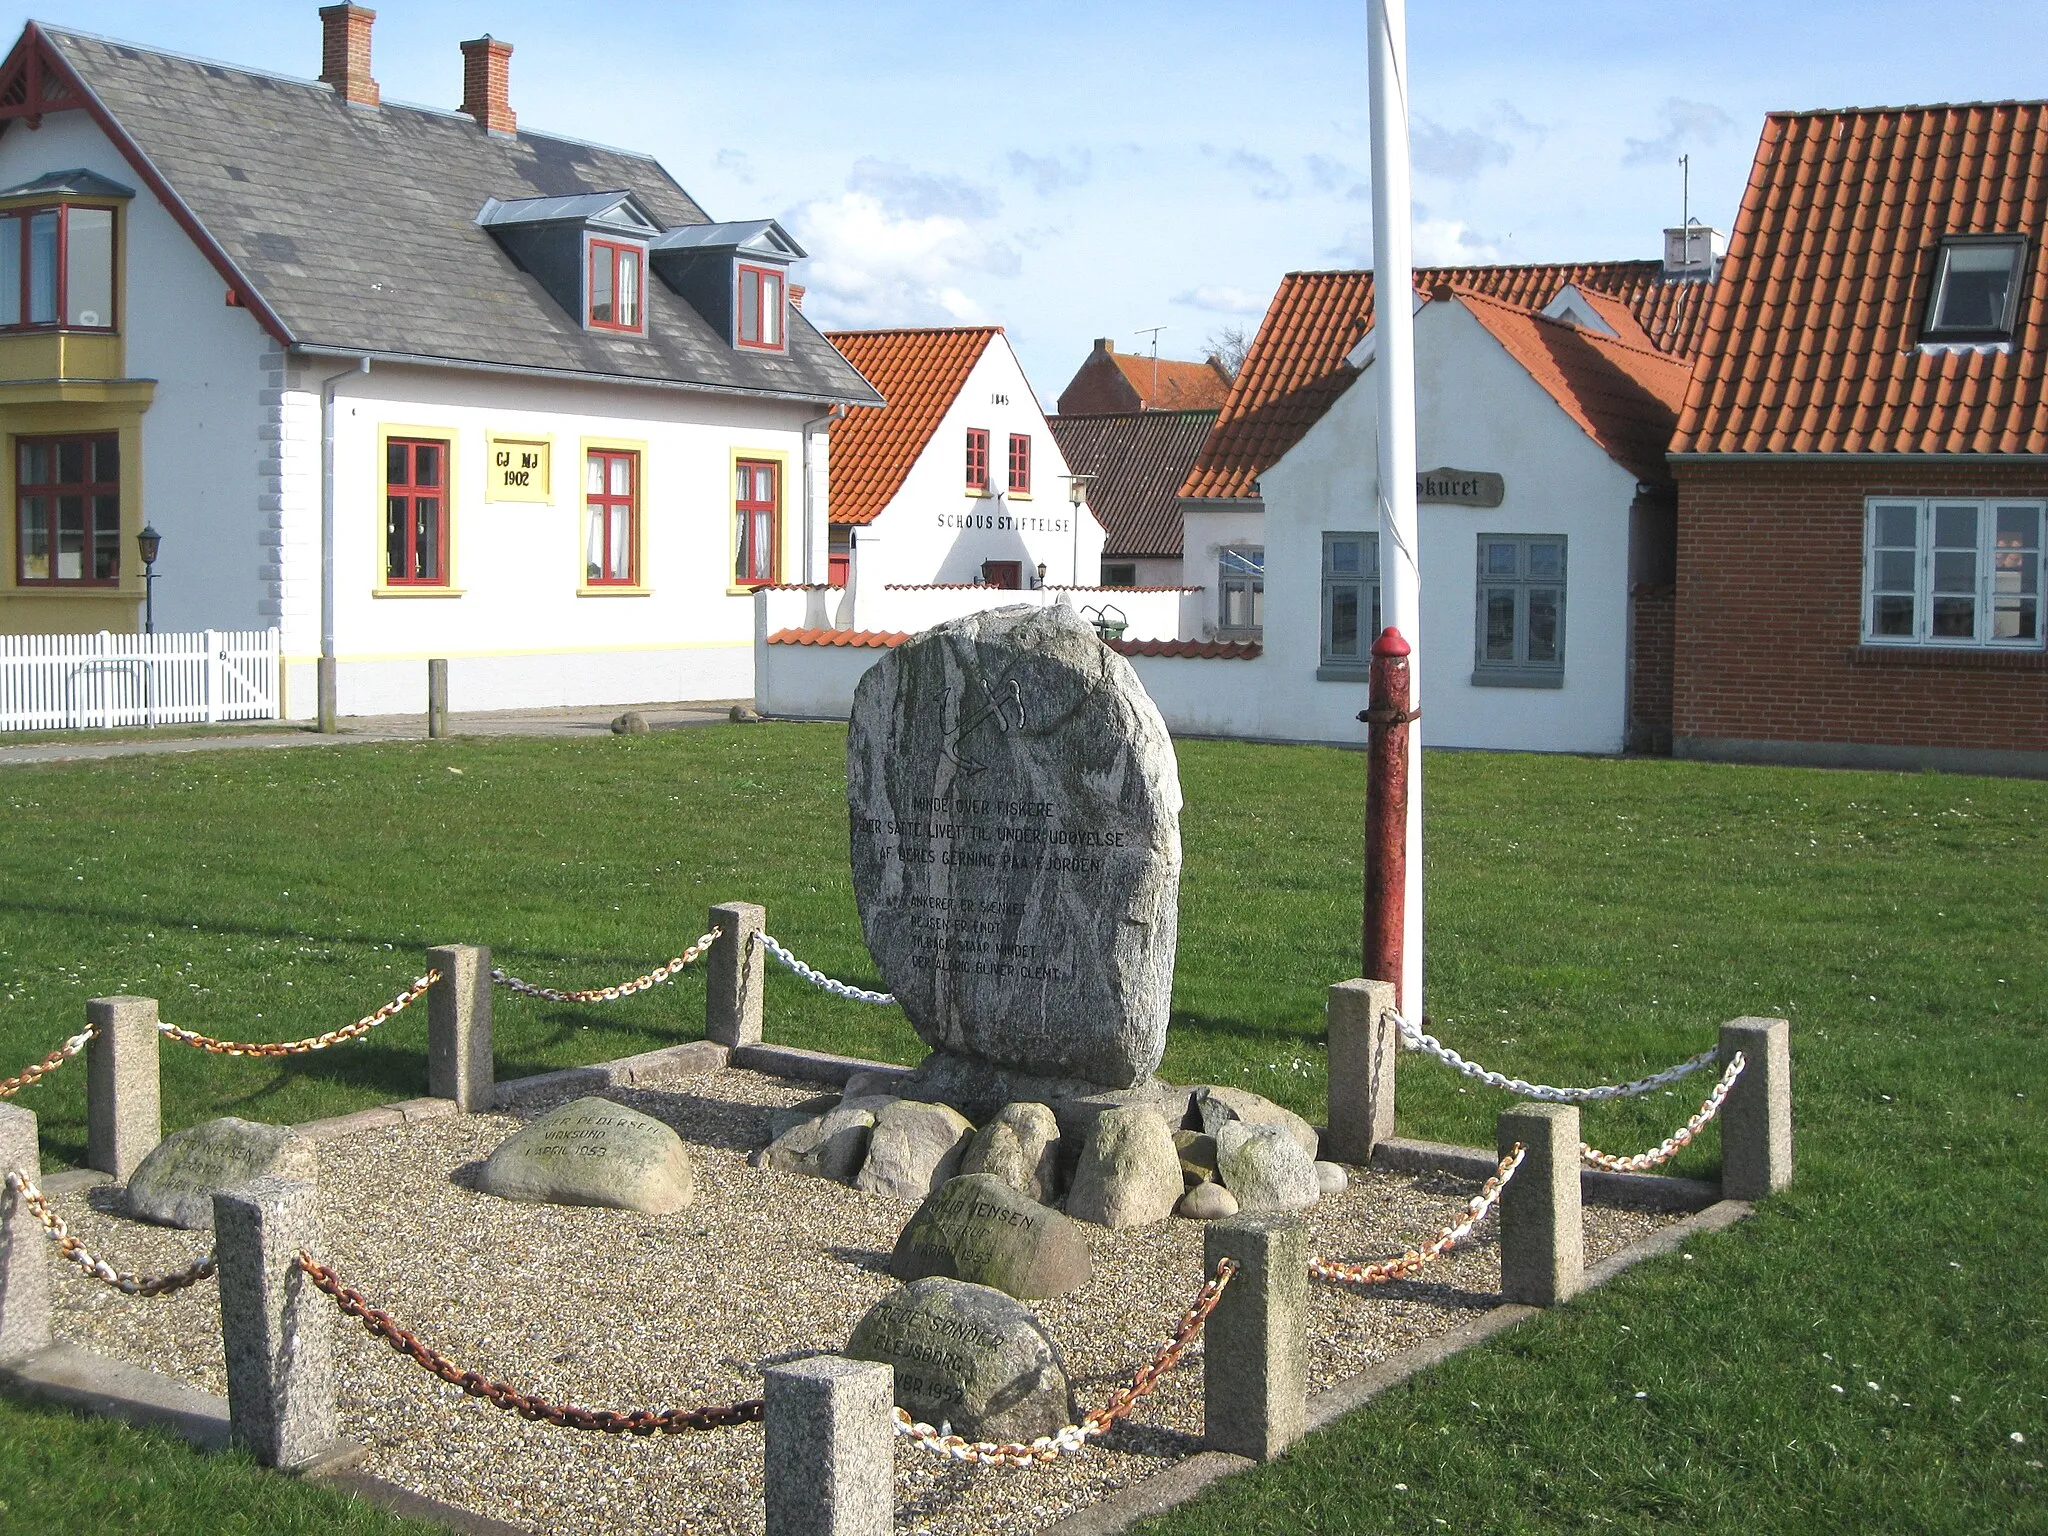 Photo showing: Memorial stone in the small town "Løgstør". The town is located in North Jutland, Denmark.